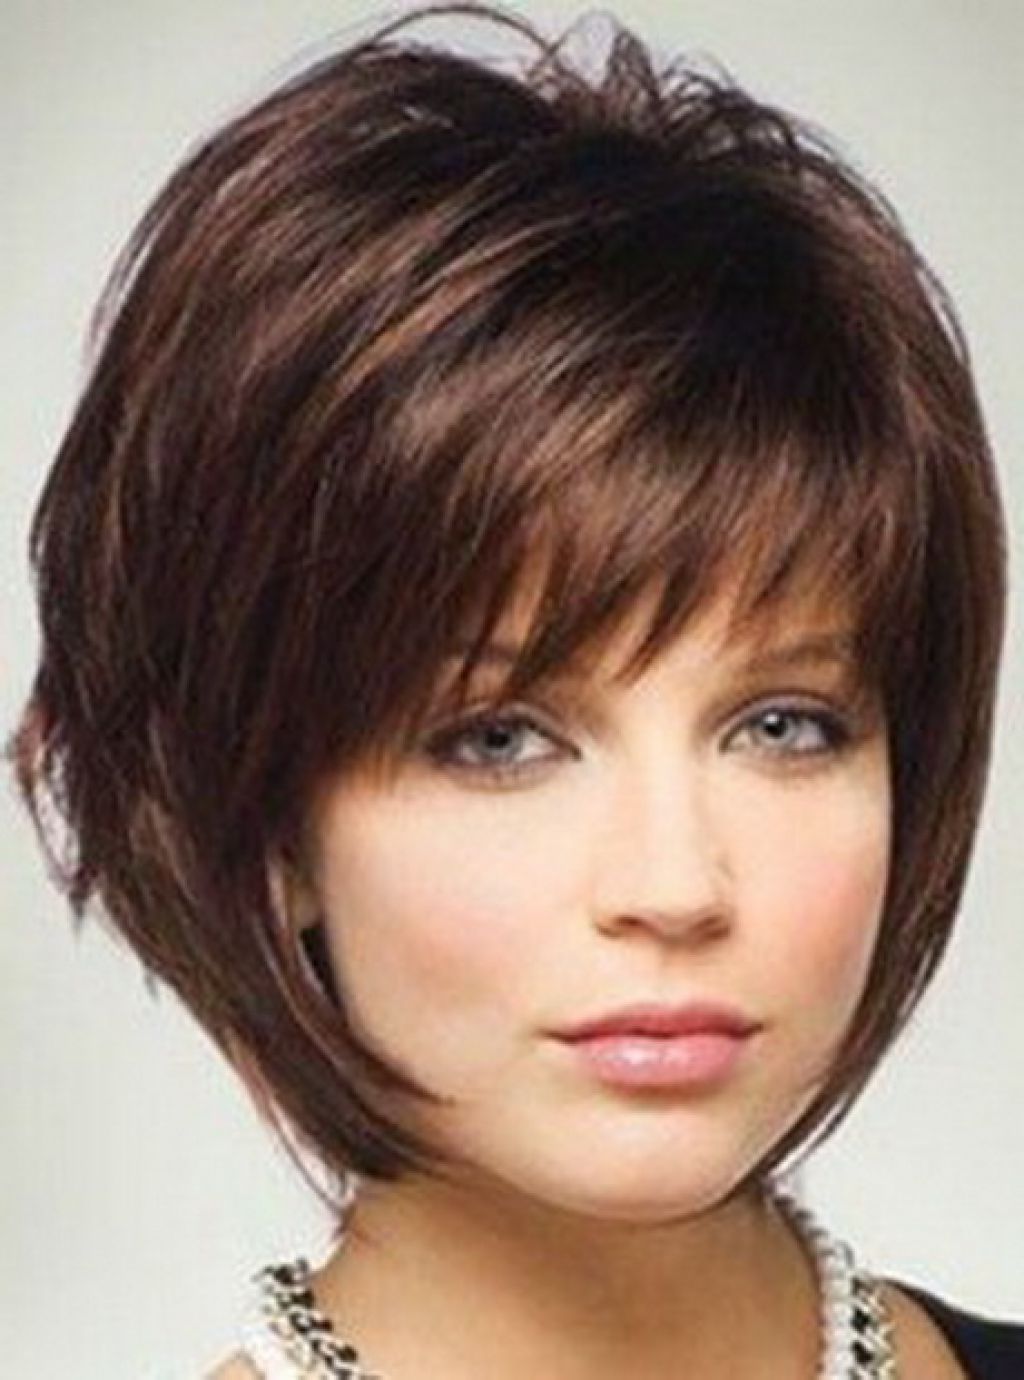 Trendy Shaggy Wispy Hairstyles Within Short Shaggy Hairstyles With Bangs – Hairstyle For Women & Man (View 5 of 15)